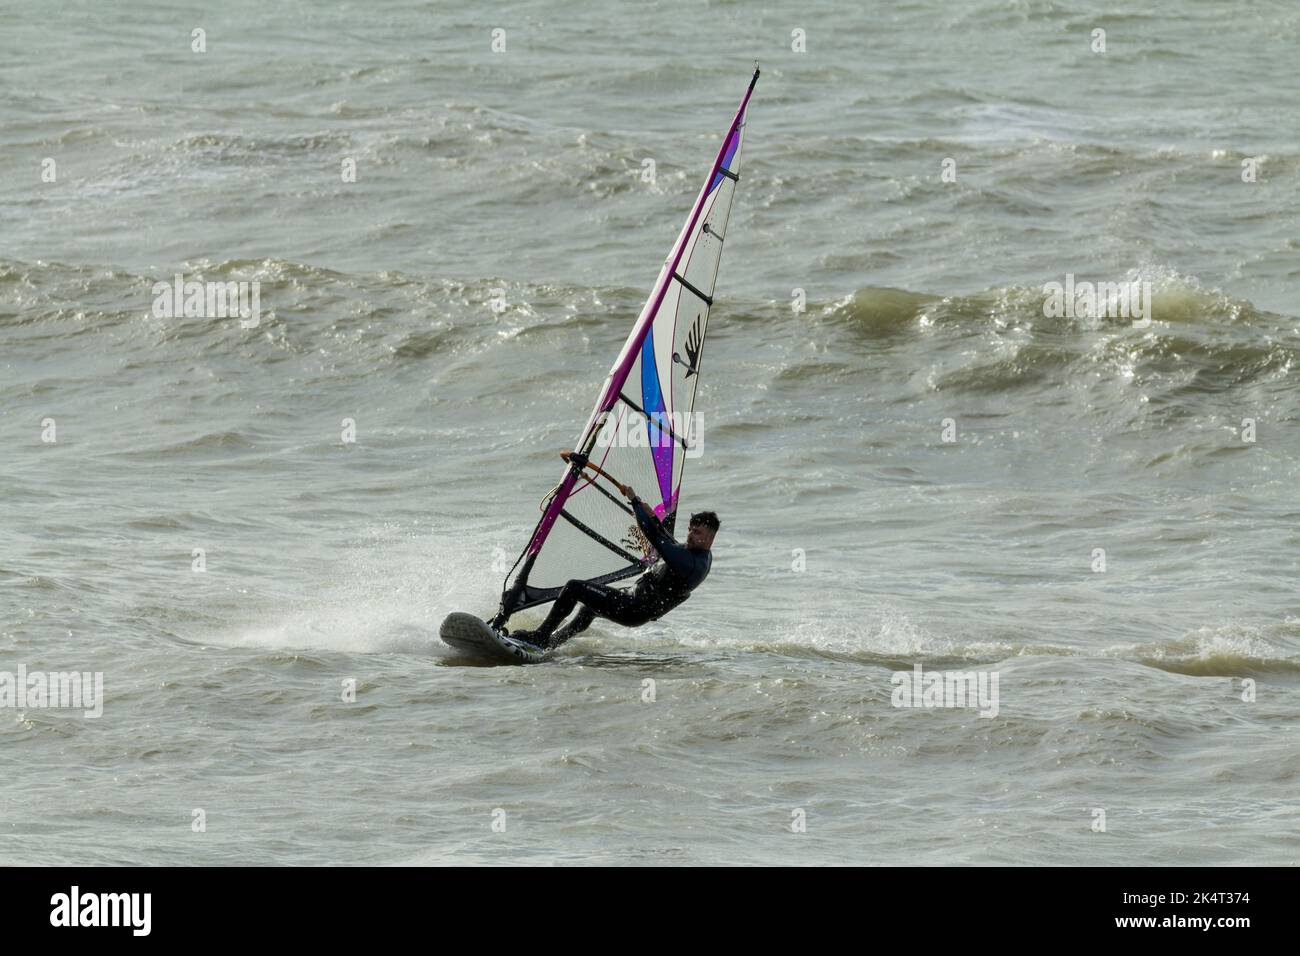 Water sport wind surfing in the sea with sail for catching the wind to propel the board and surfer sail is tilted and turned to steer and catch wind Stock Photo